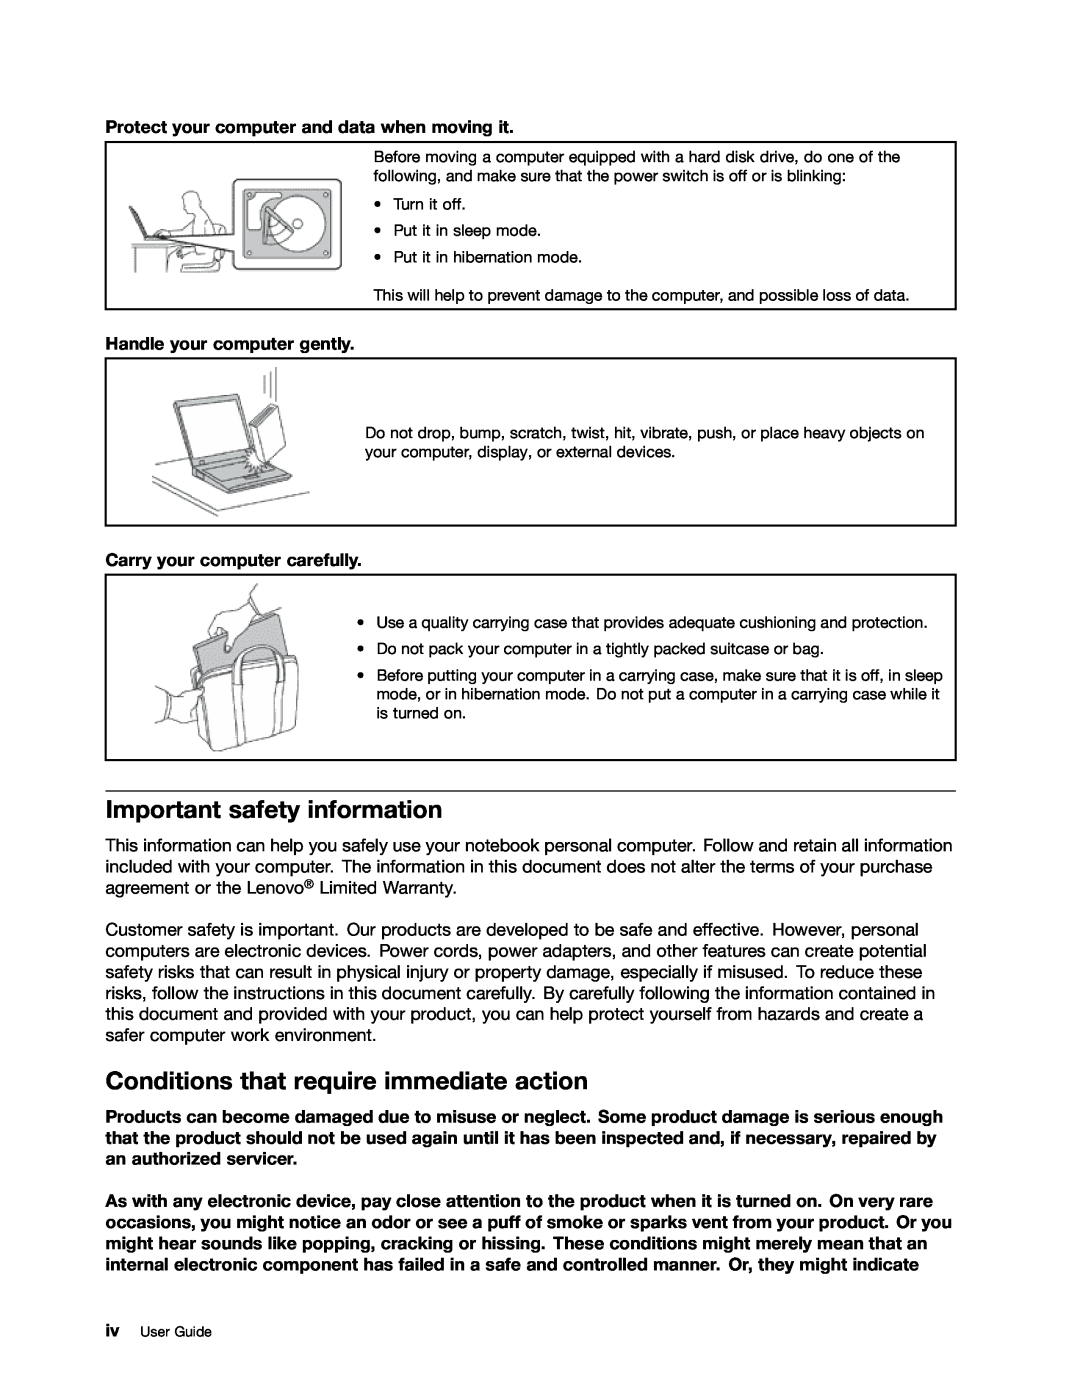 Lenovo B480, B580 manual Important safety information, Conditions that require immediate action, Handle your computer gently 